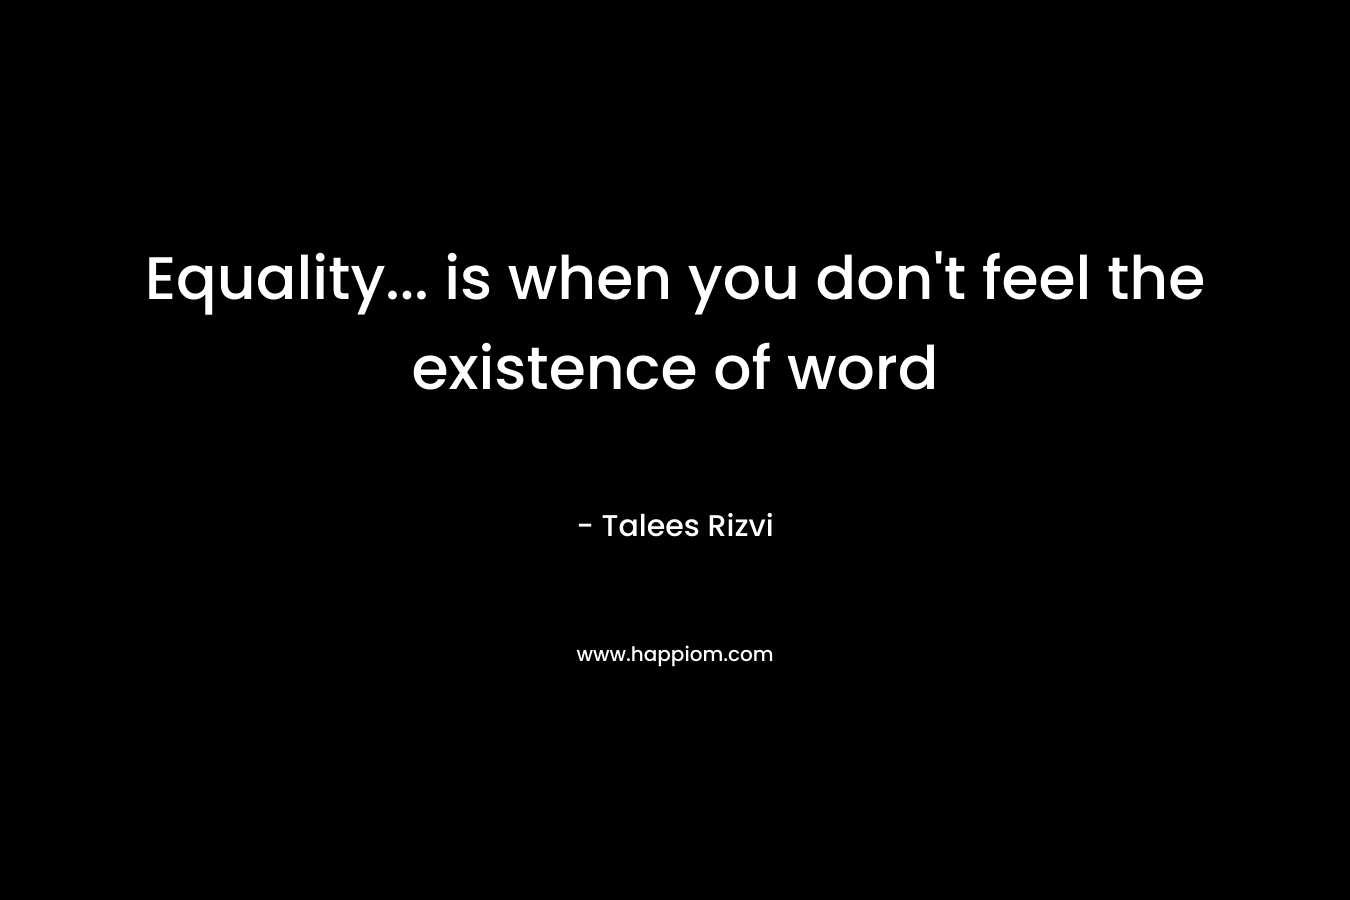 Equality… is when you don’t feel the existence of word – Talees Rizvi